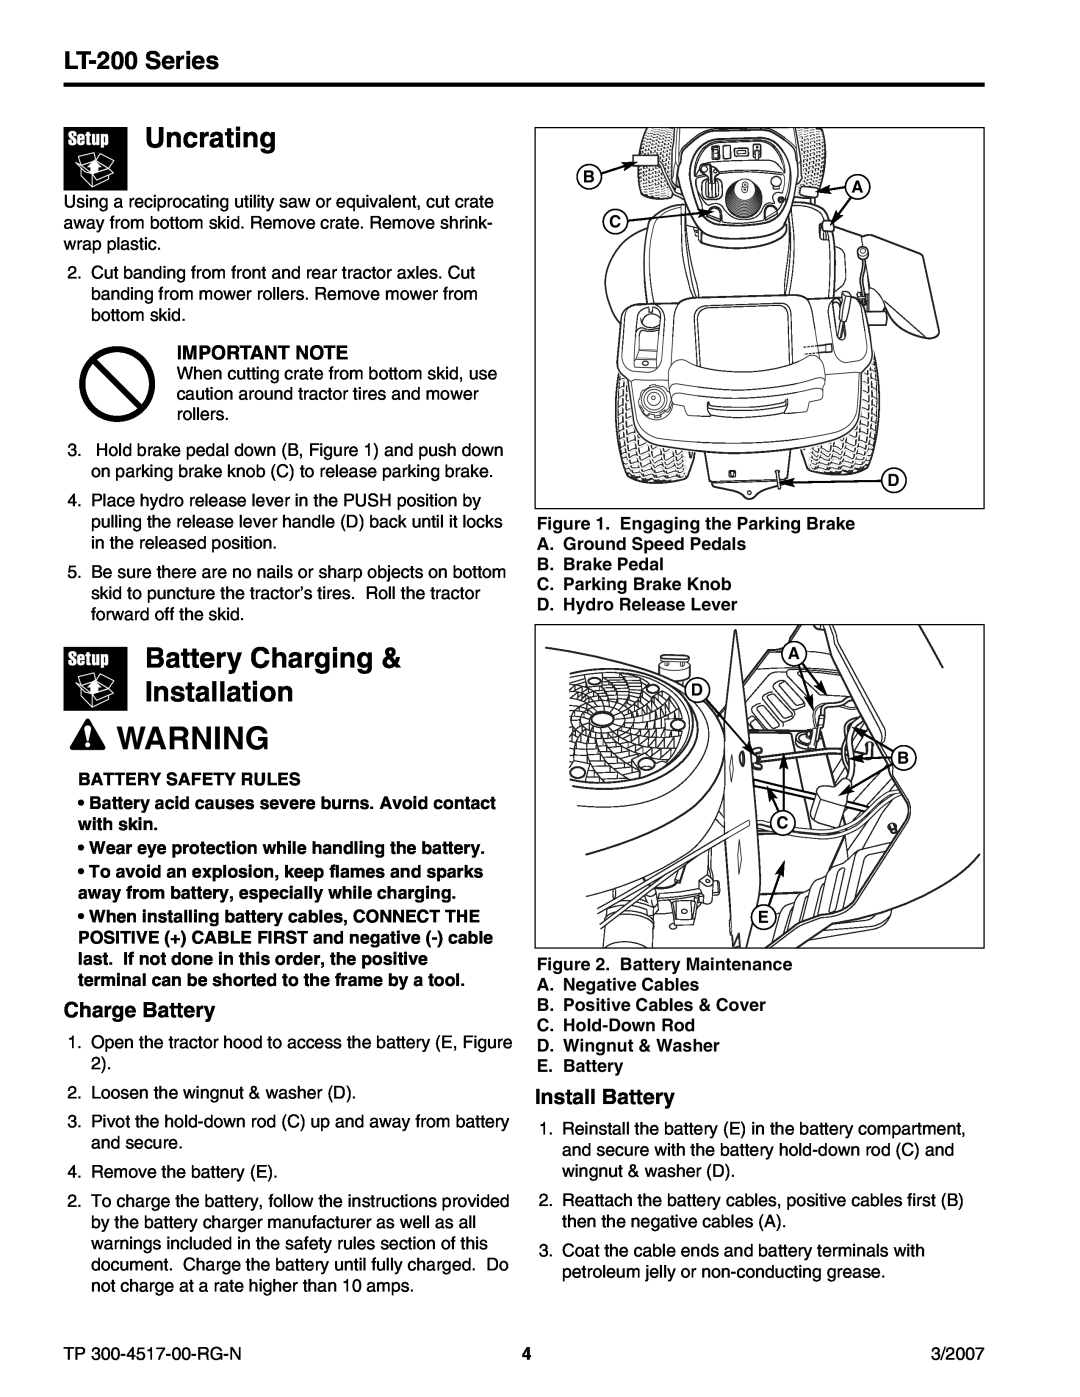 Briggs & Stratton manual Uncrating, Battery Charging Installation, Charge Battery, Install Battery, LT-200 Series 